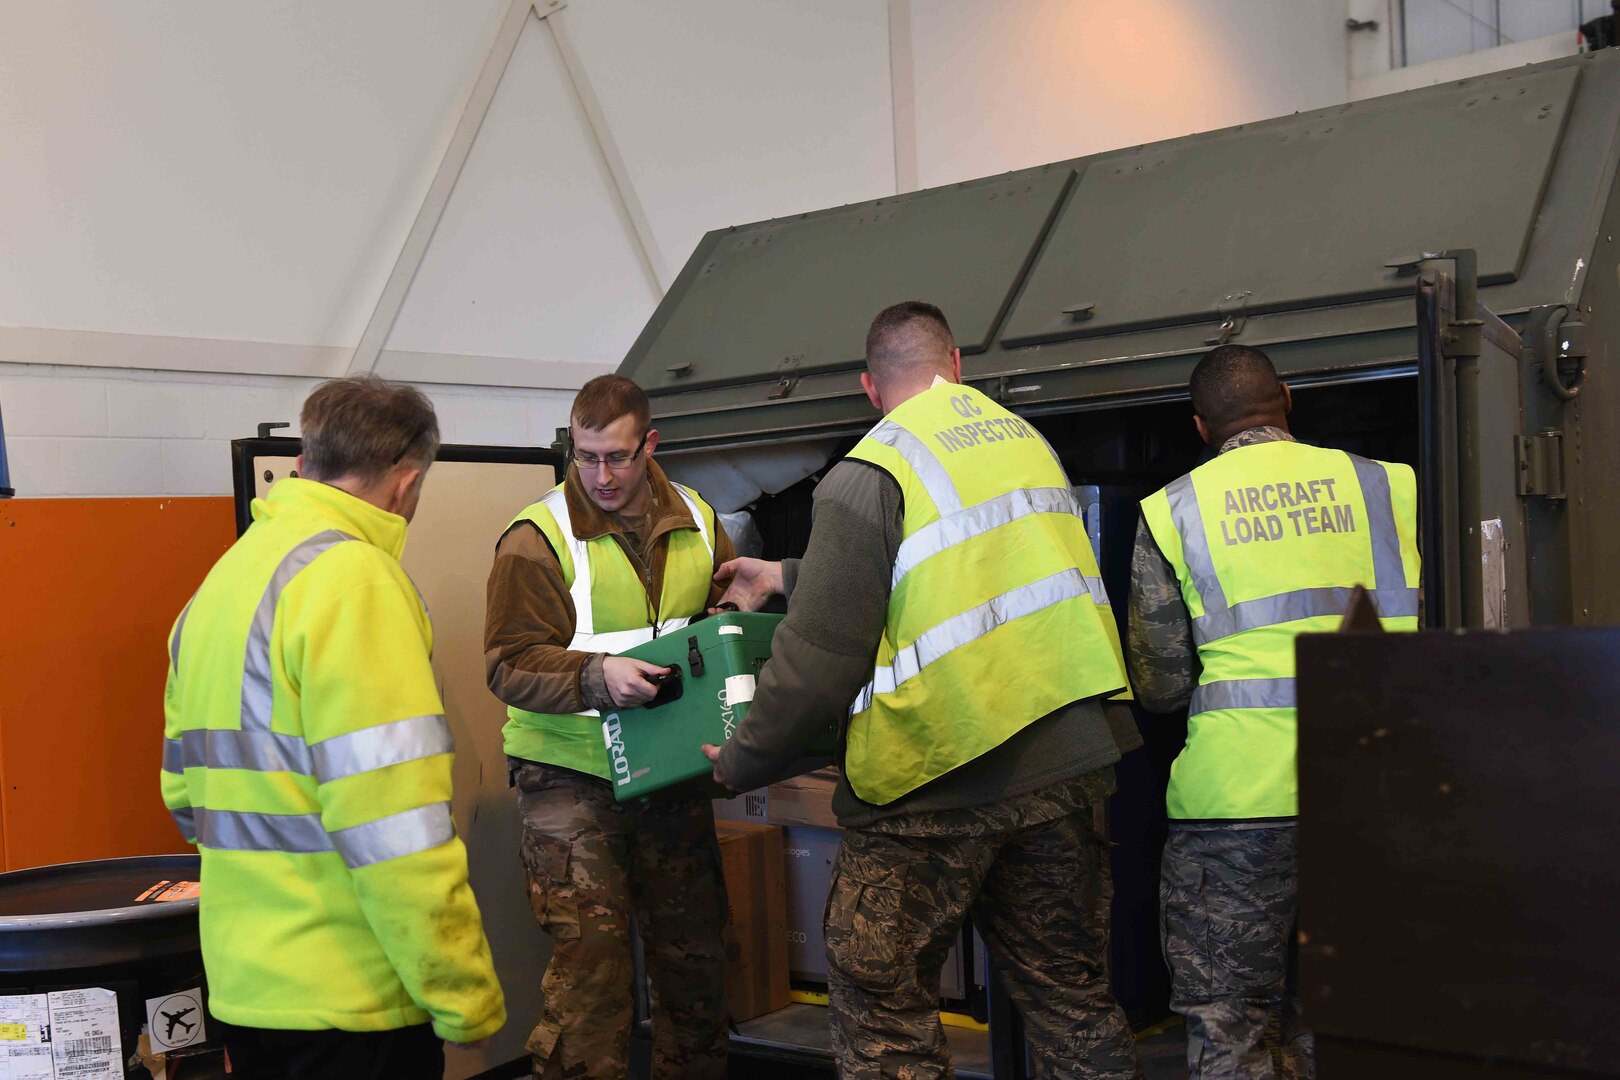 48th Deployment and Distribution Flight personnel prepare a cargo load at Royal Air Force Lakenheath, England, January 16, 2019. The flight is in charge of shipping government cargo as well as receiving cargo incoming from other bases. (U.S. Air Force photo by Airman 1st Class Shanice Williams-Jones)